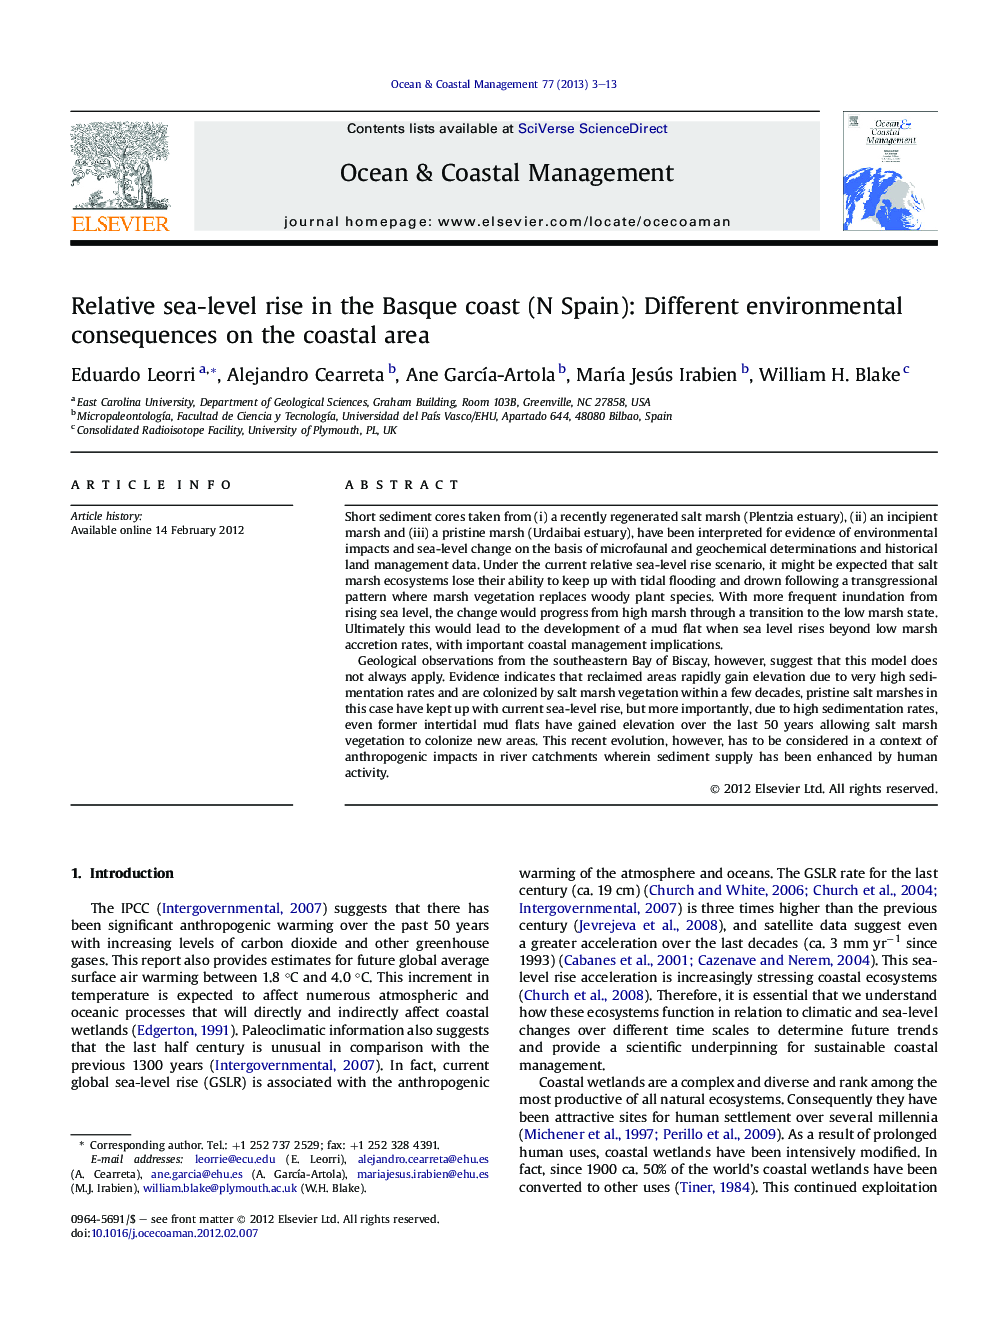 Relative sea-level rise in the Basque coast (N Spain): Different environmental consequences on the coastal area